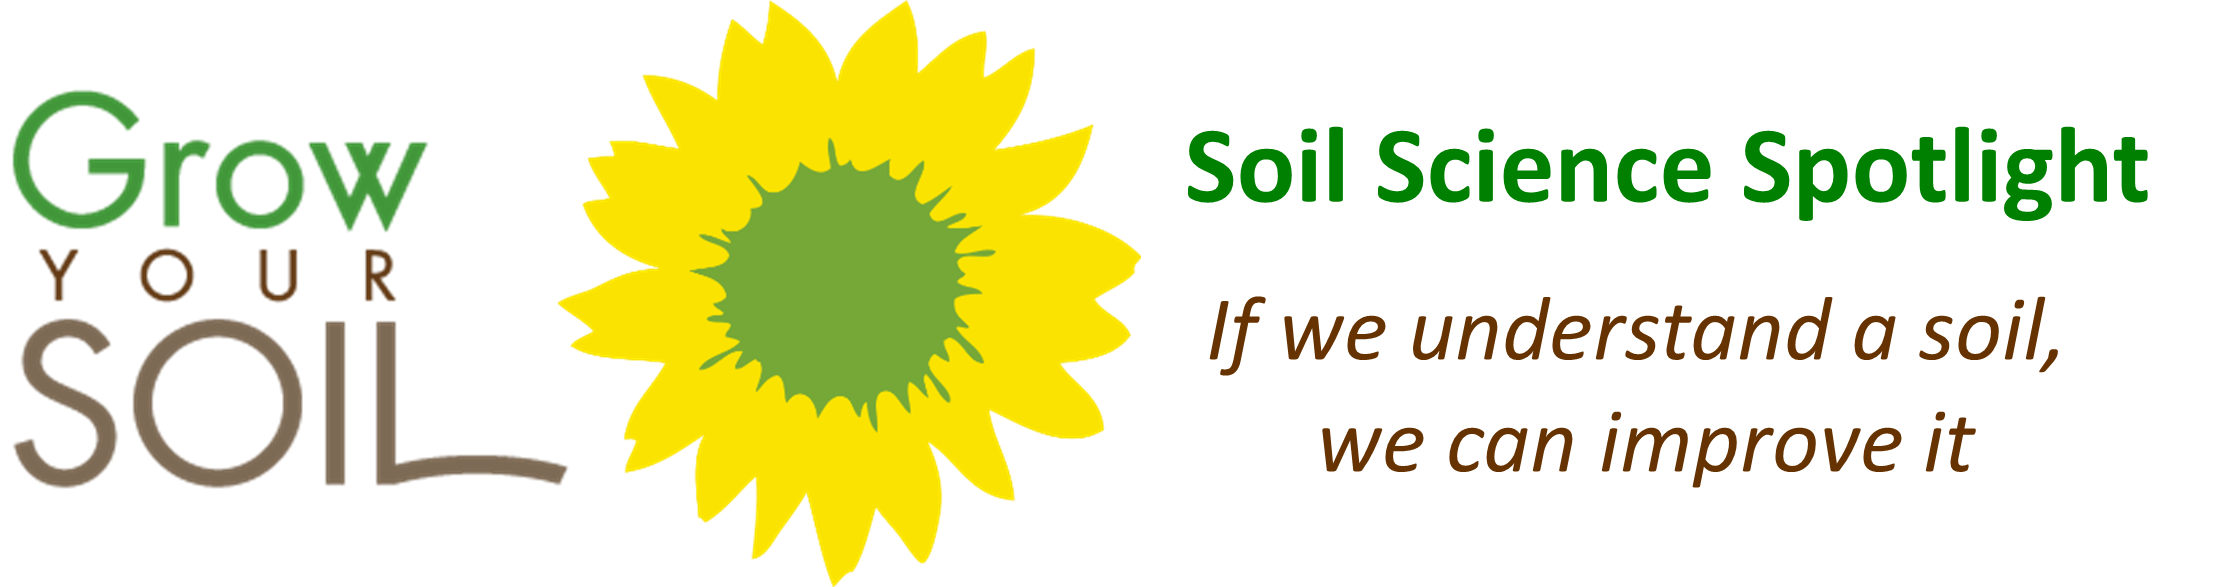 Soil Science Spotlight - Grow Your Soil - If we understand a soil we can improve it